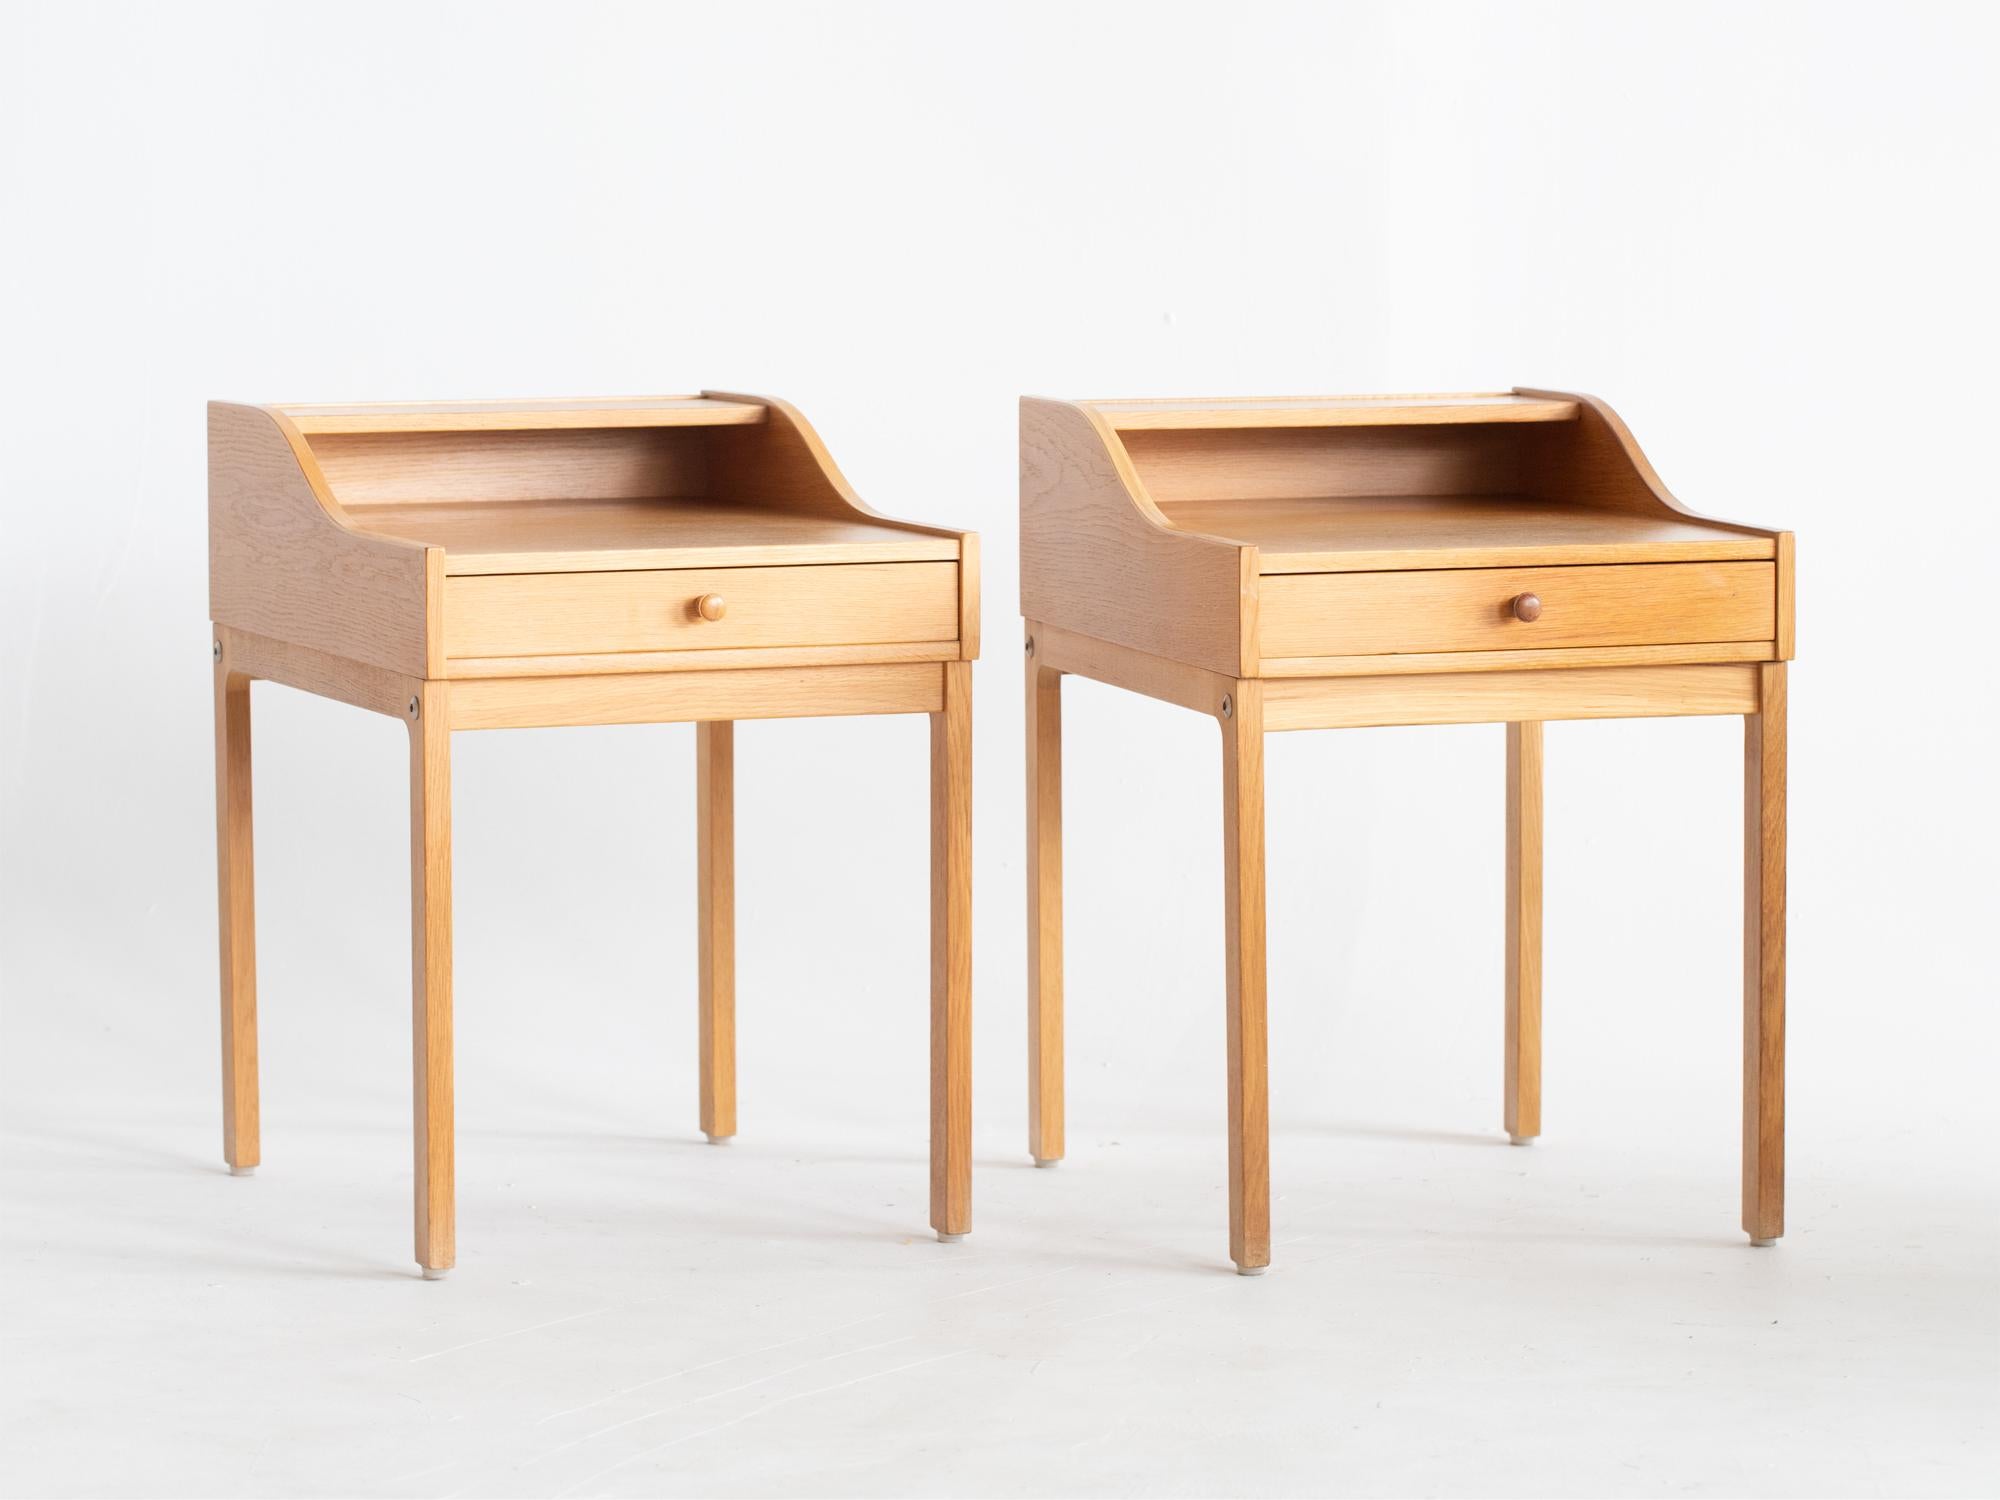 A pair of single-drawer oak and oak-veneered bedside tables by Möbel-Ikea. Swedish, c. 1960s.

Both in good sturdy order with light cosmetic wear.

55 x 38.5 x 52.5 cm

21.7 x 15.2 x 20.7 